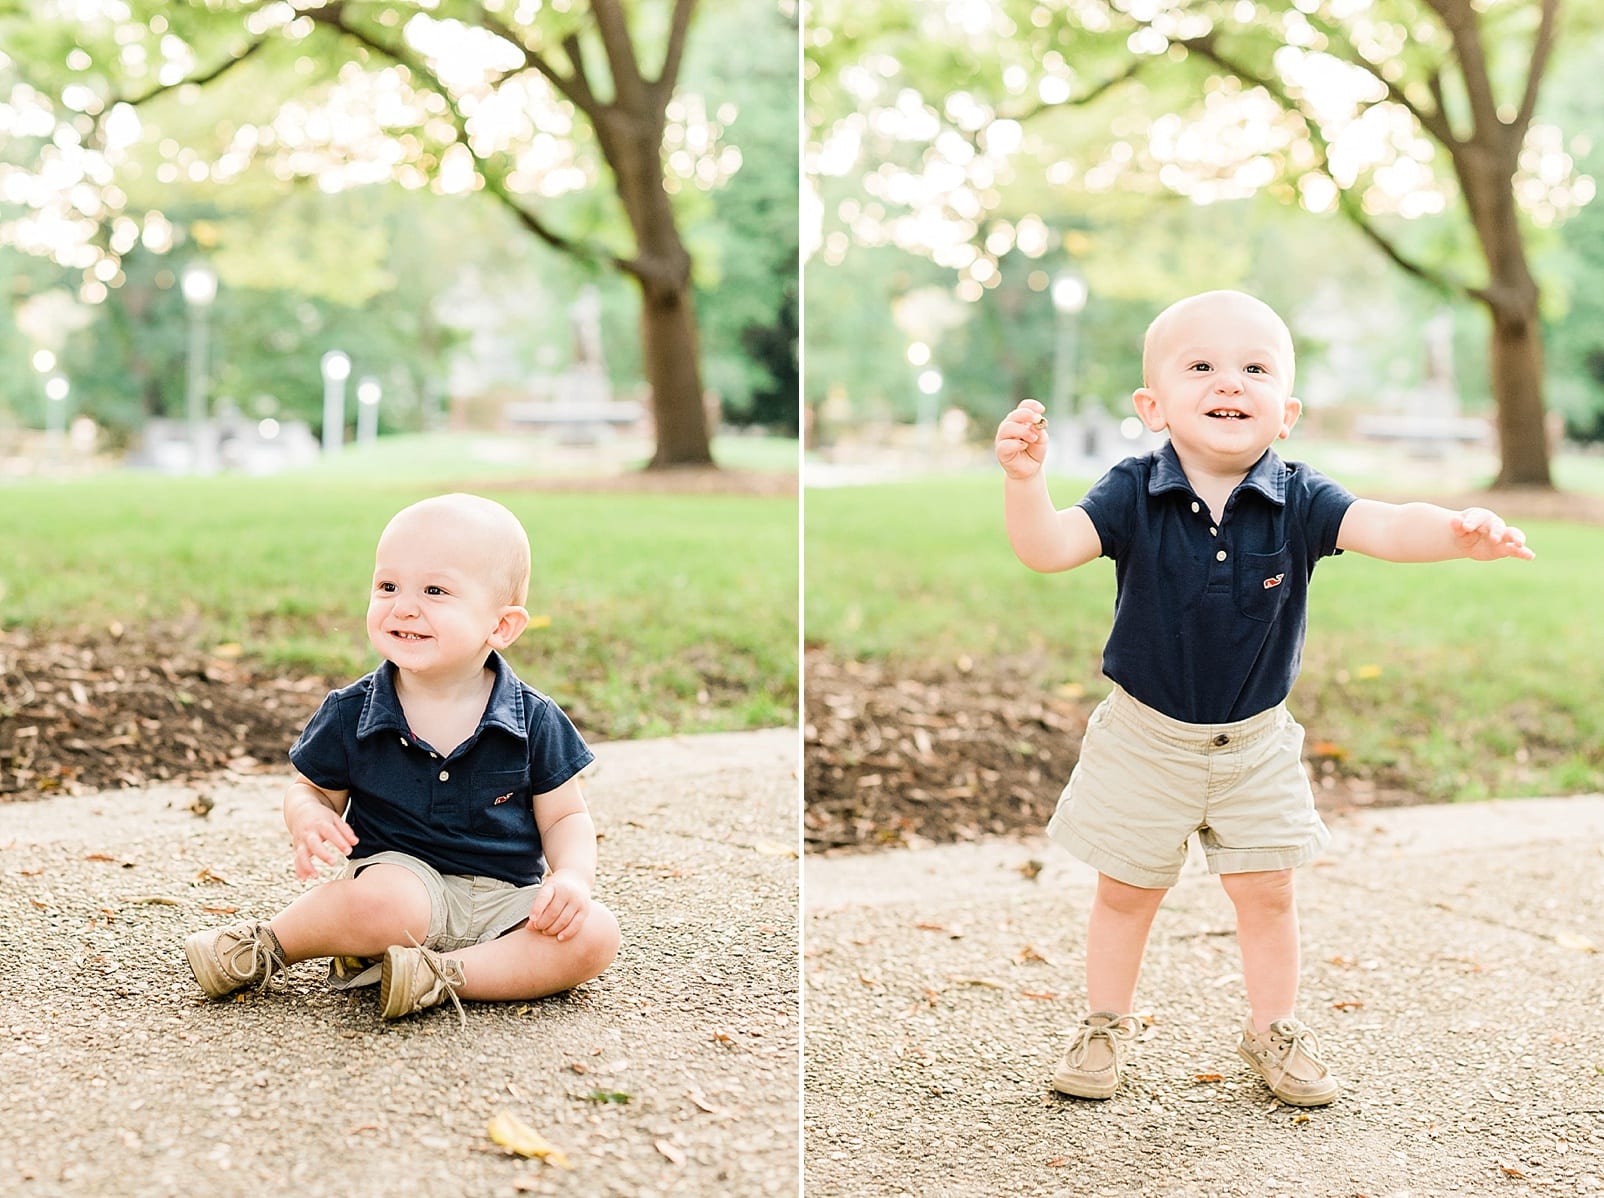 NC capitol grounds downtown Raleigh one year old boy photo session photo